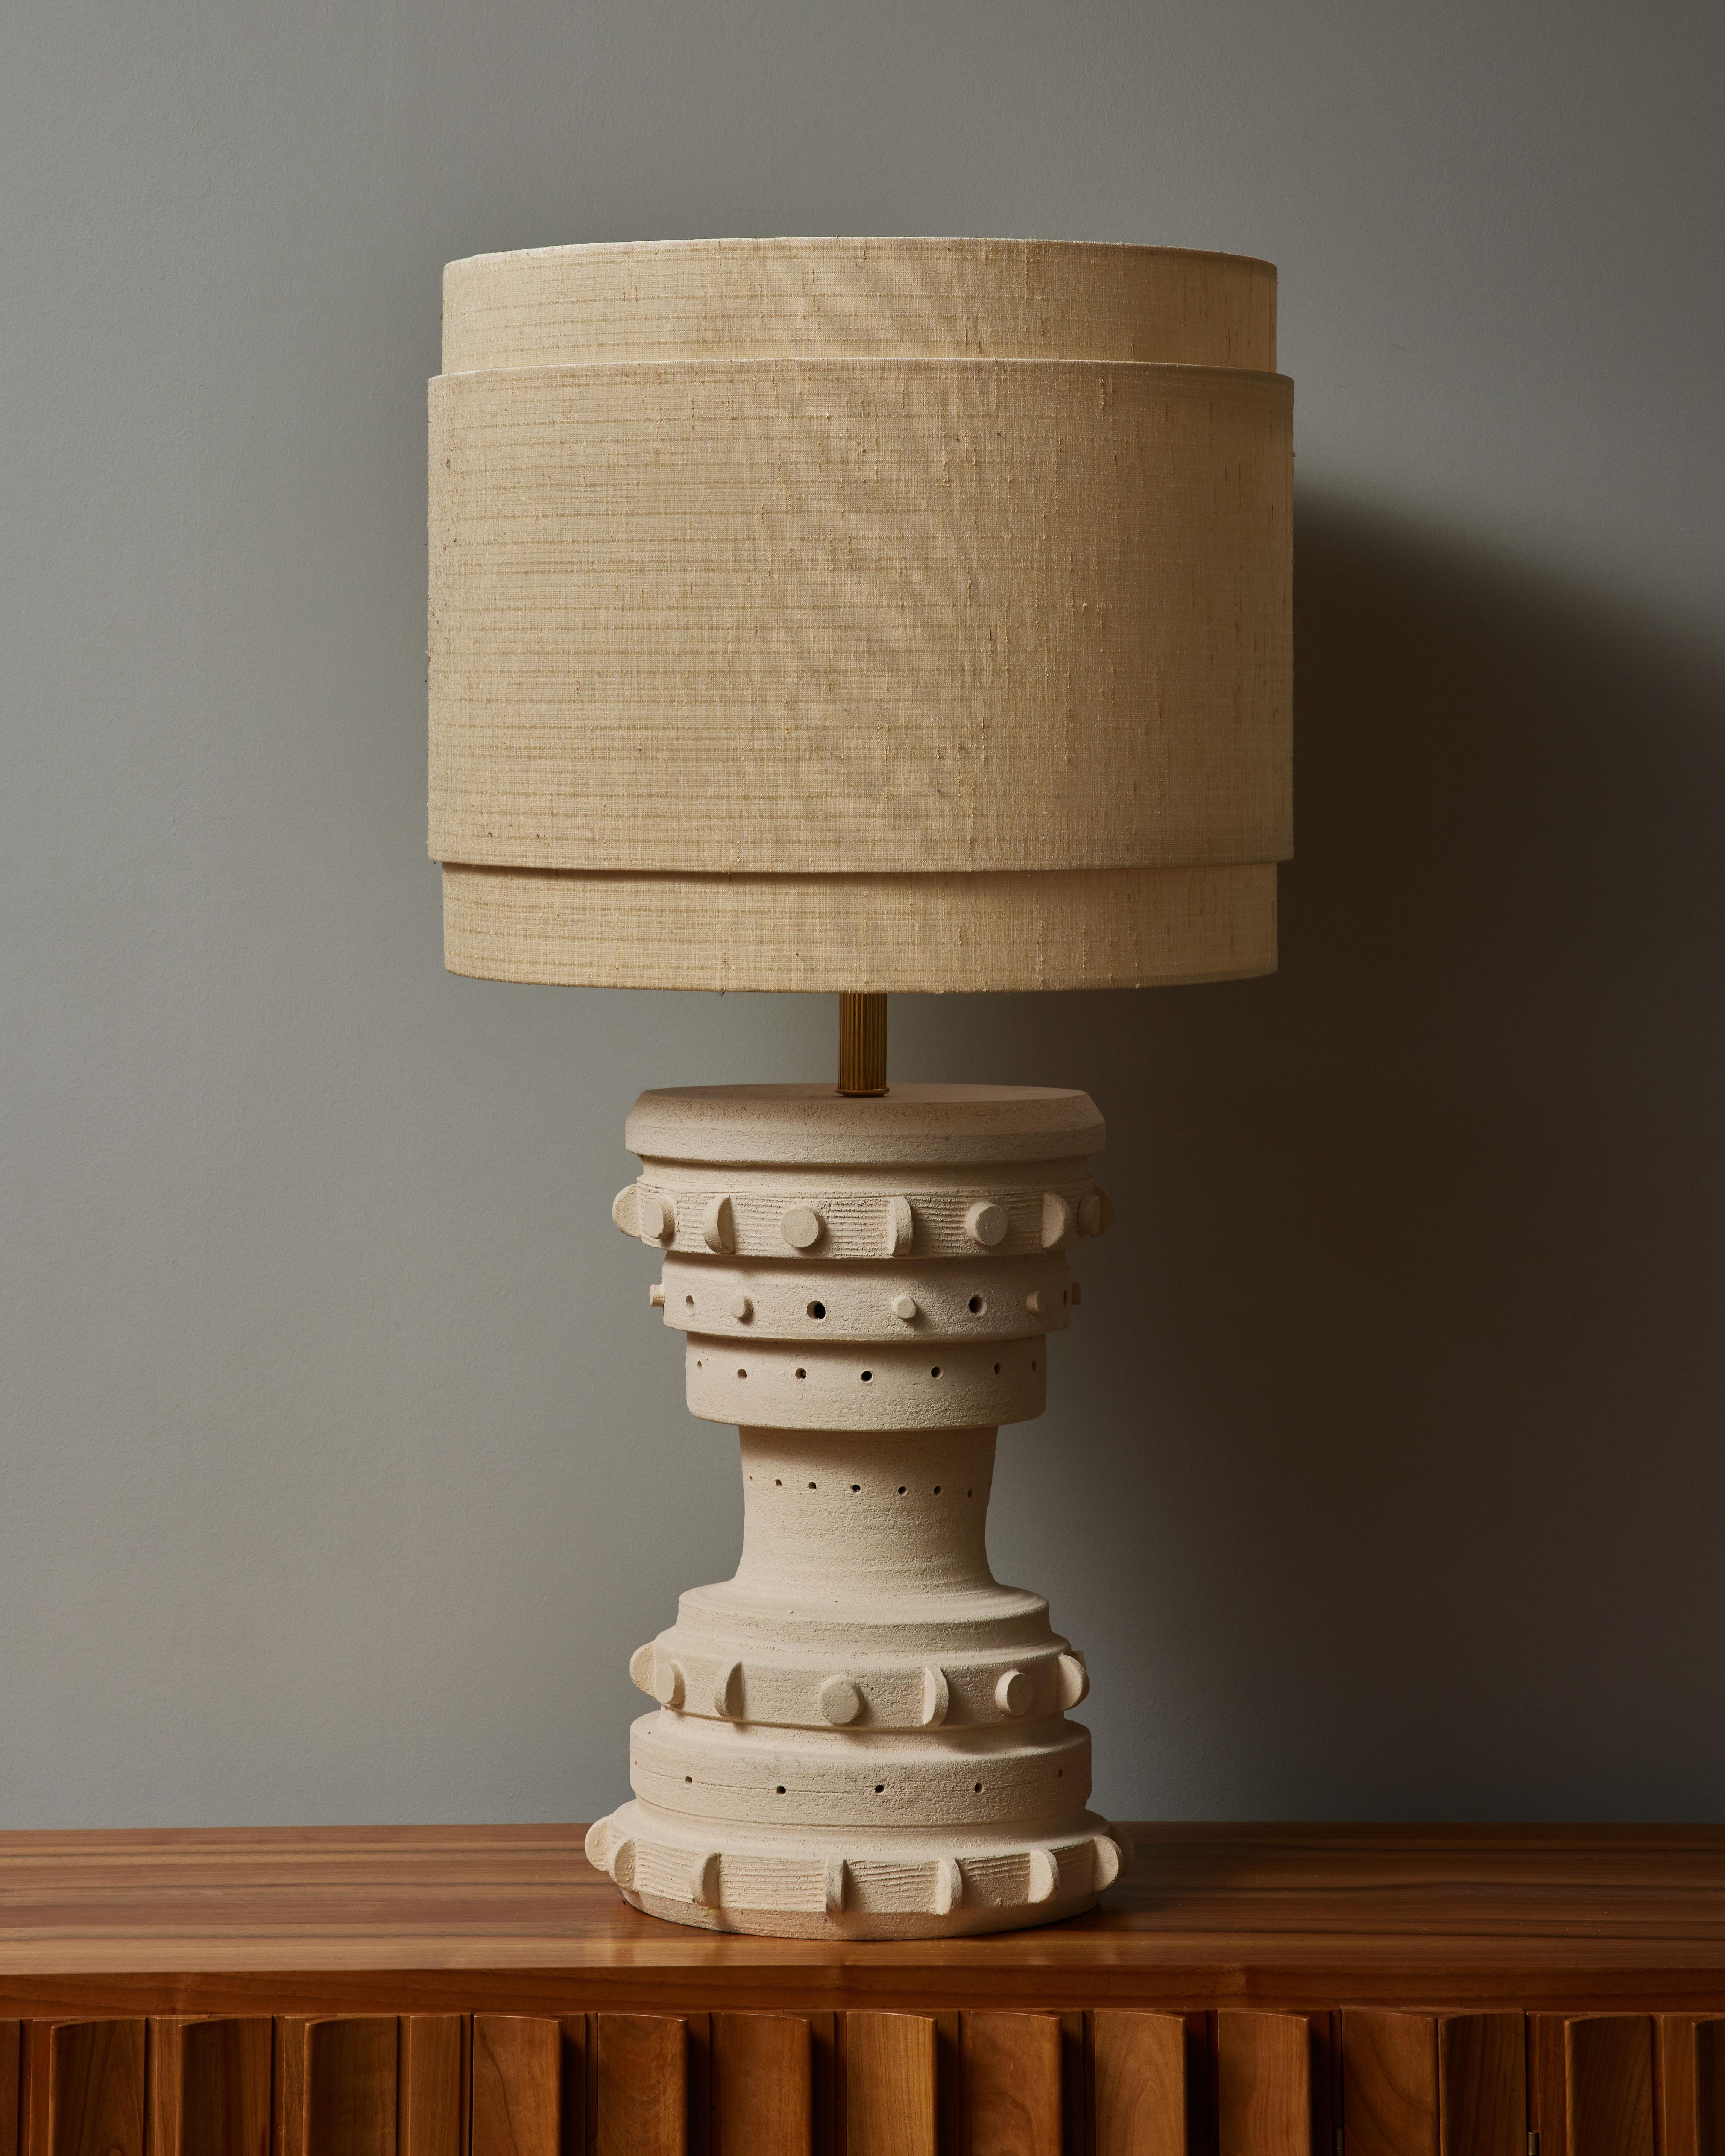 Single table lamp made in unglazed ceramic by the french artist Olivia Cognet


Since moving to Los Angeles in 2016, French artist and desi- gner Olivia Cognet has focused on ceramics as the fertile medium through which she expresses her